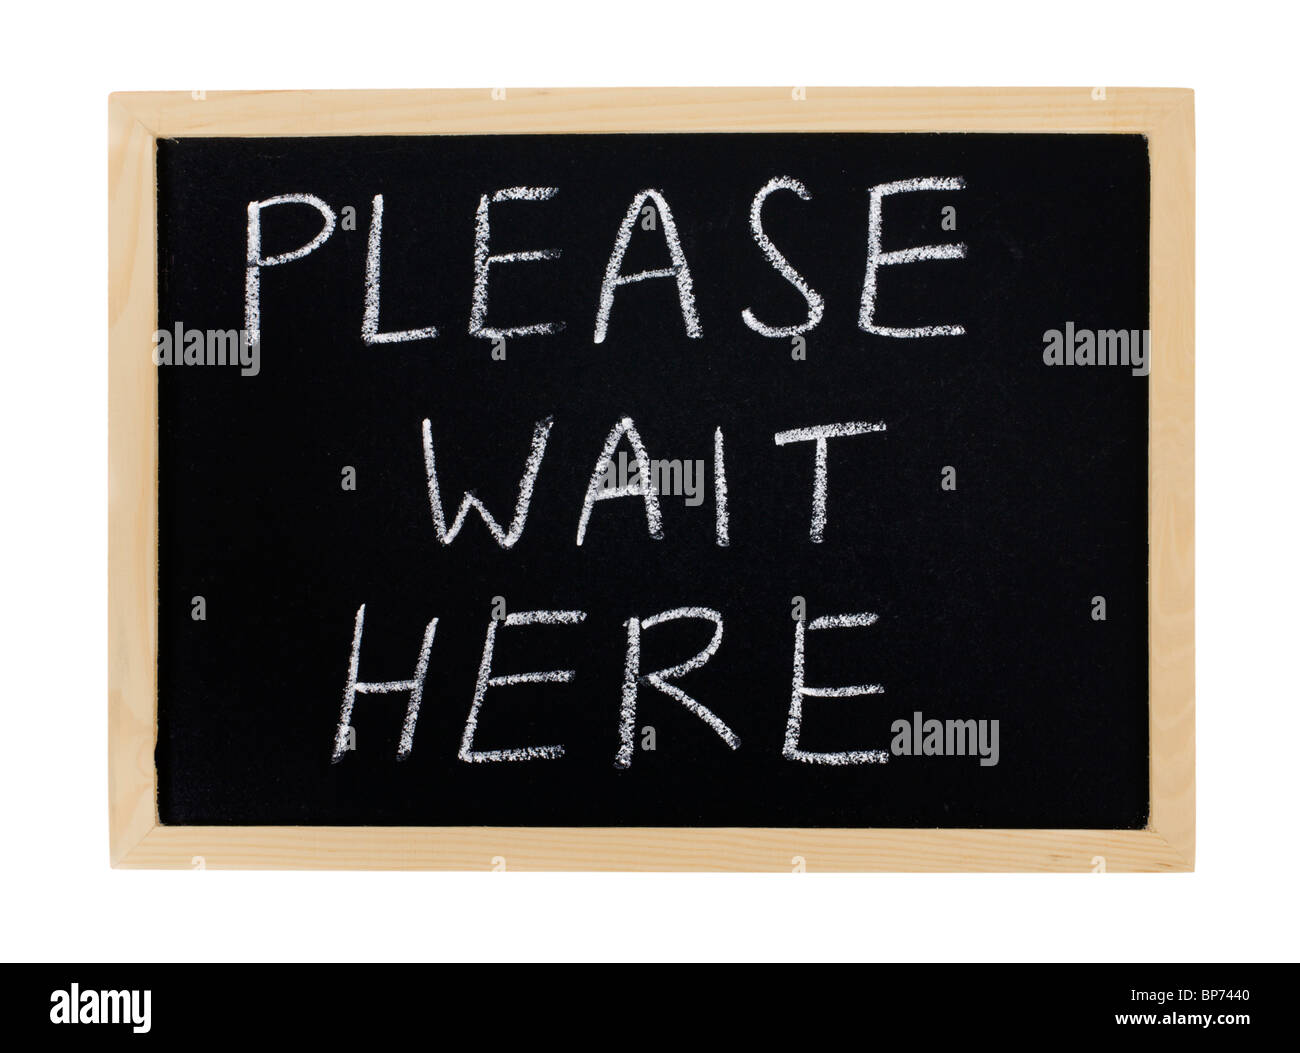 A message, 'Please Wait Here' on a chalkboard. Stock Photo